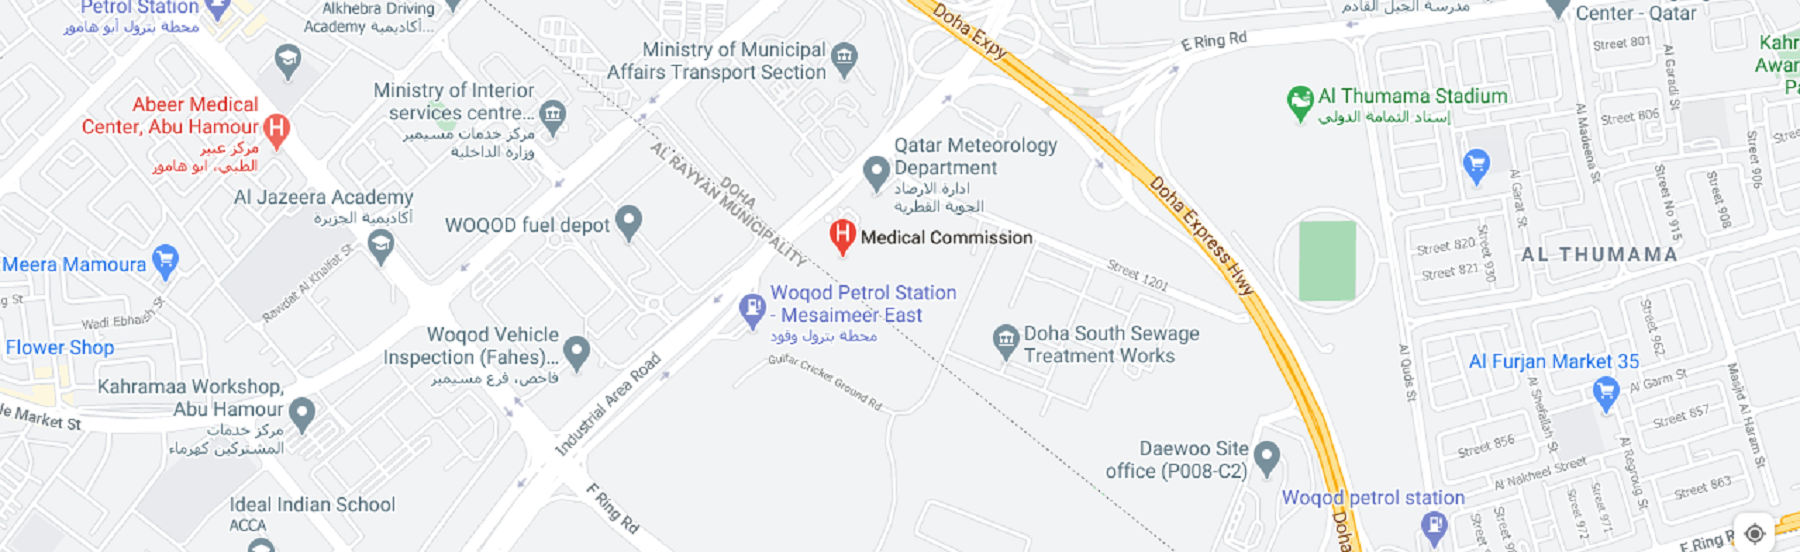 Qatar Ministry of Public Health, Medical Commission location on Google Map